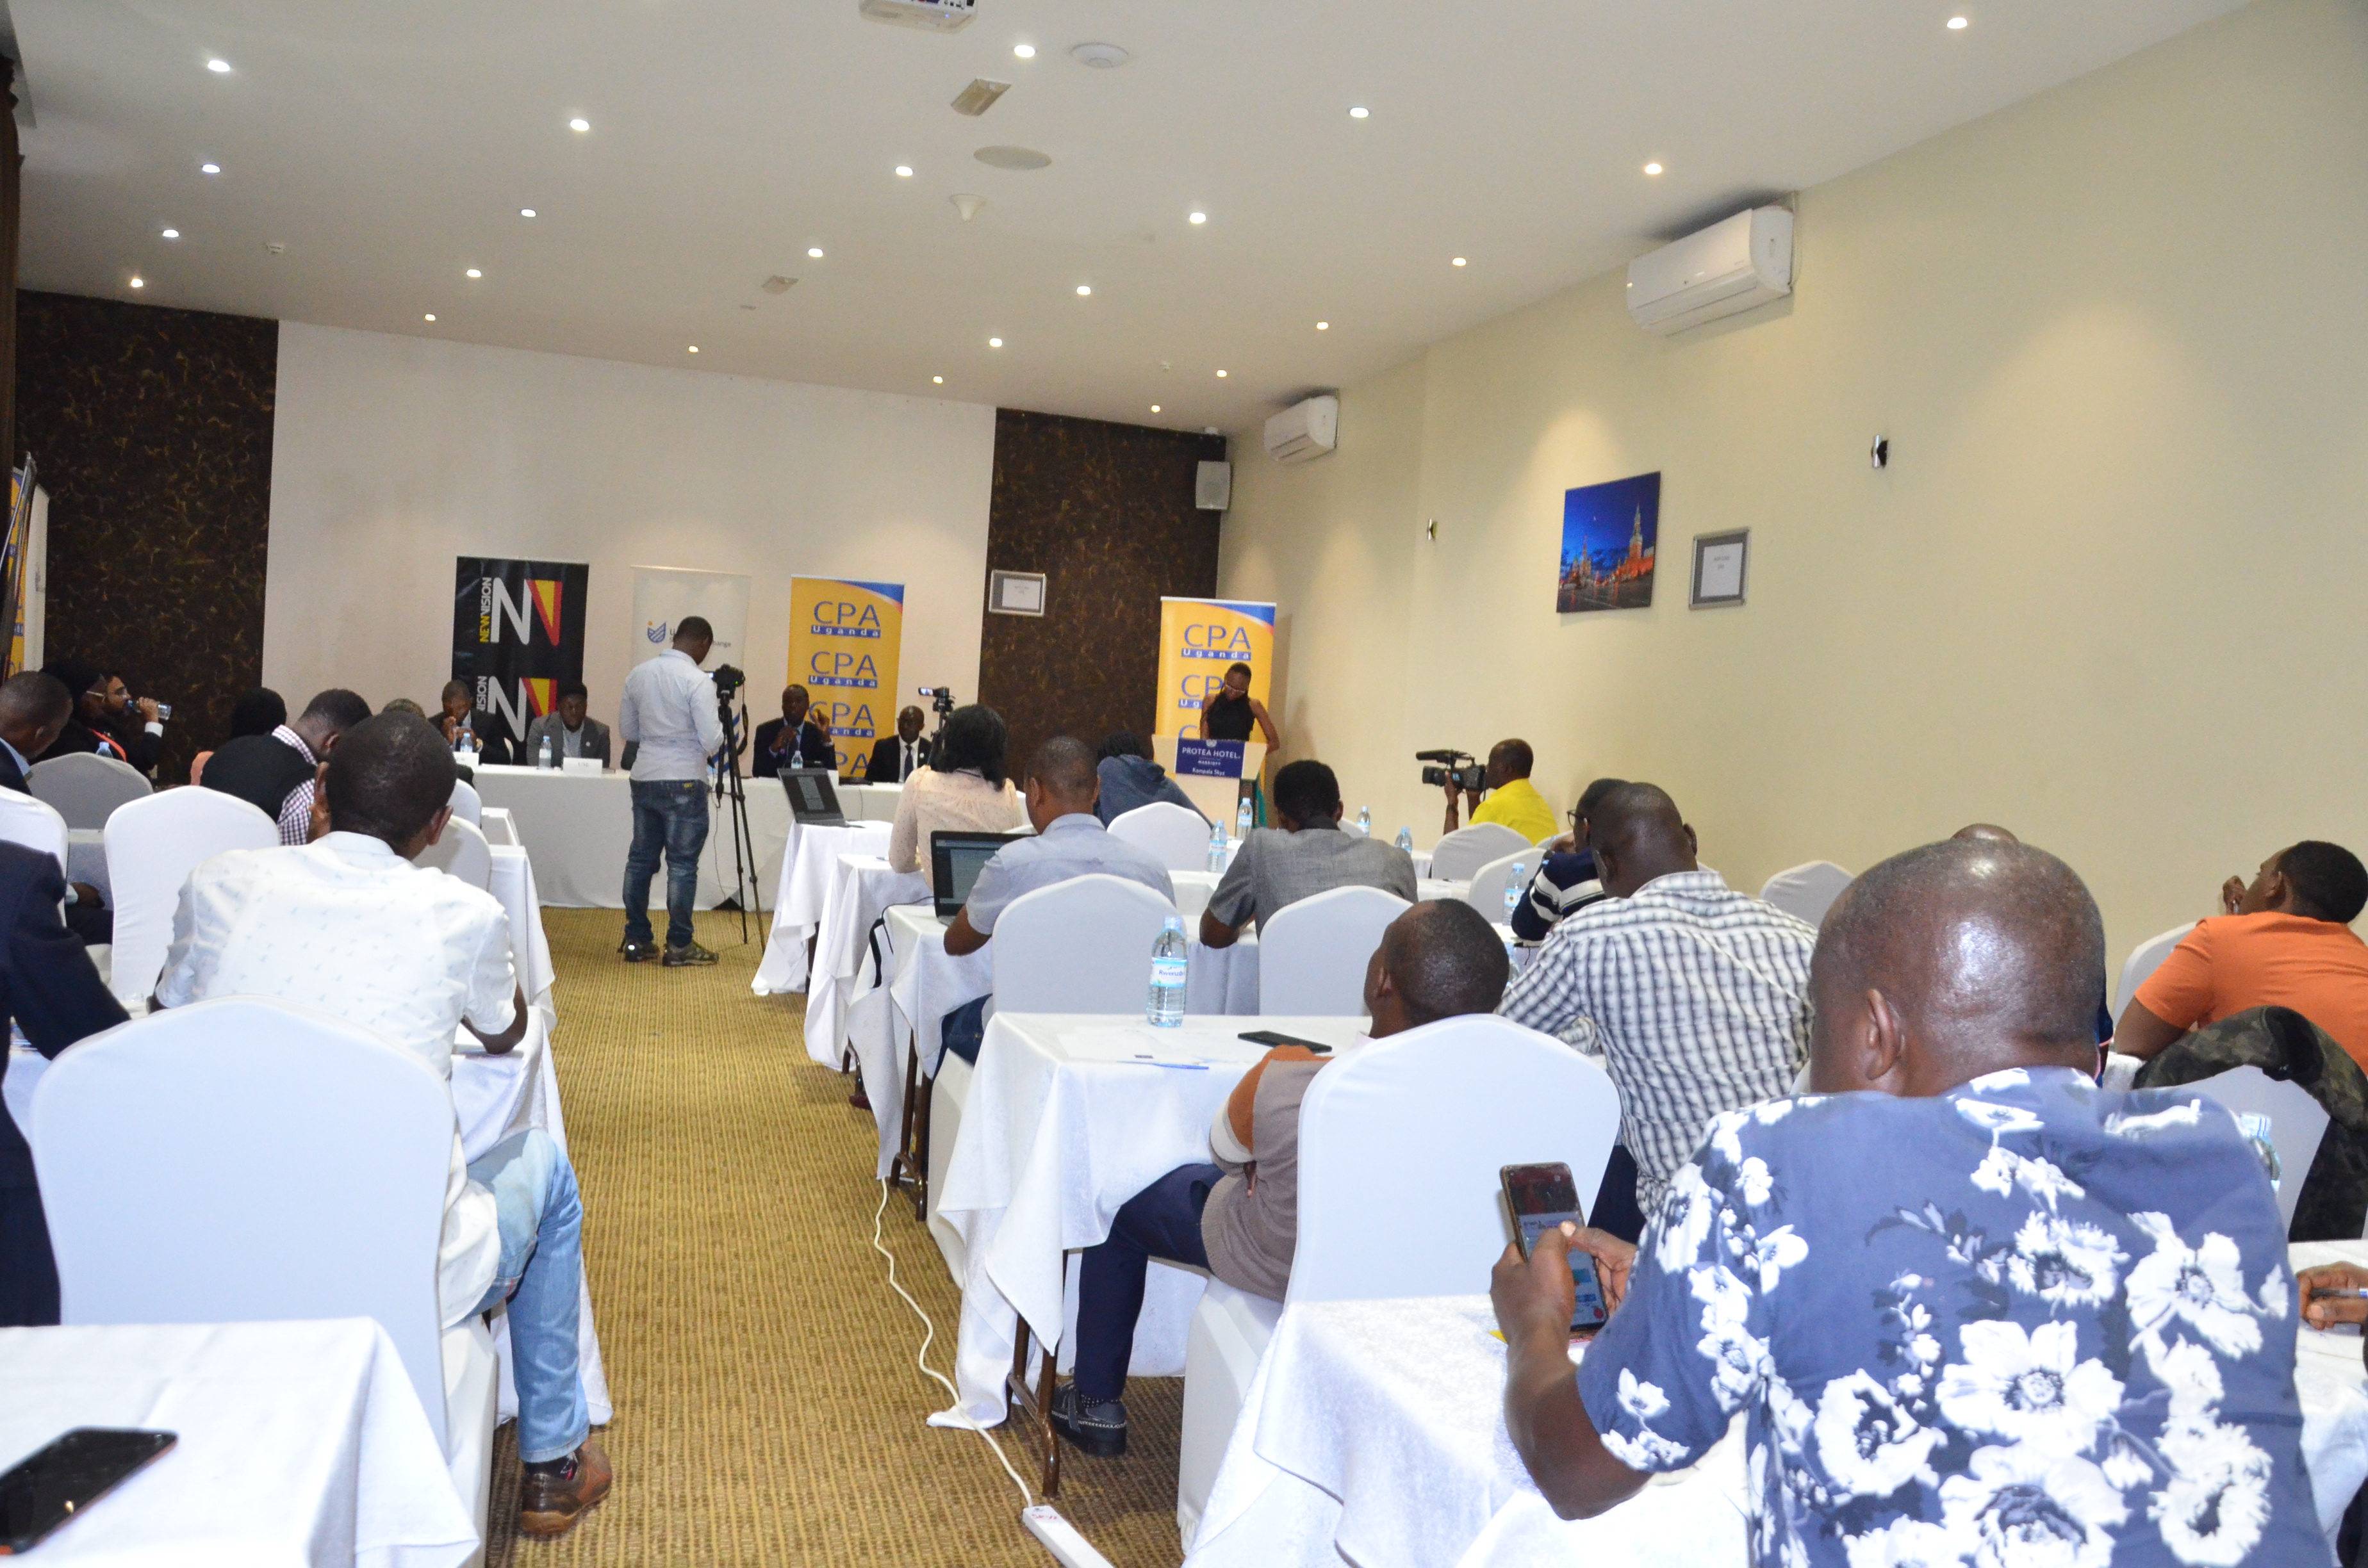 The press gathered at Protea Hotel Skyz, Naguru for the 2023 FiRe awards media briefing.